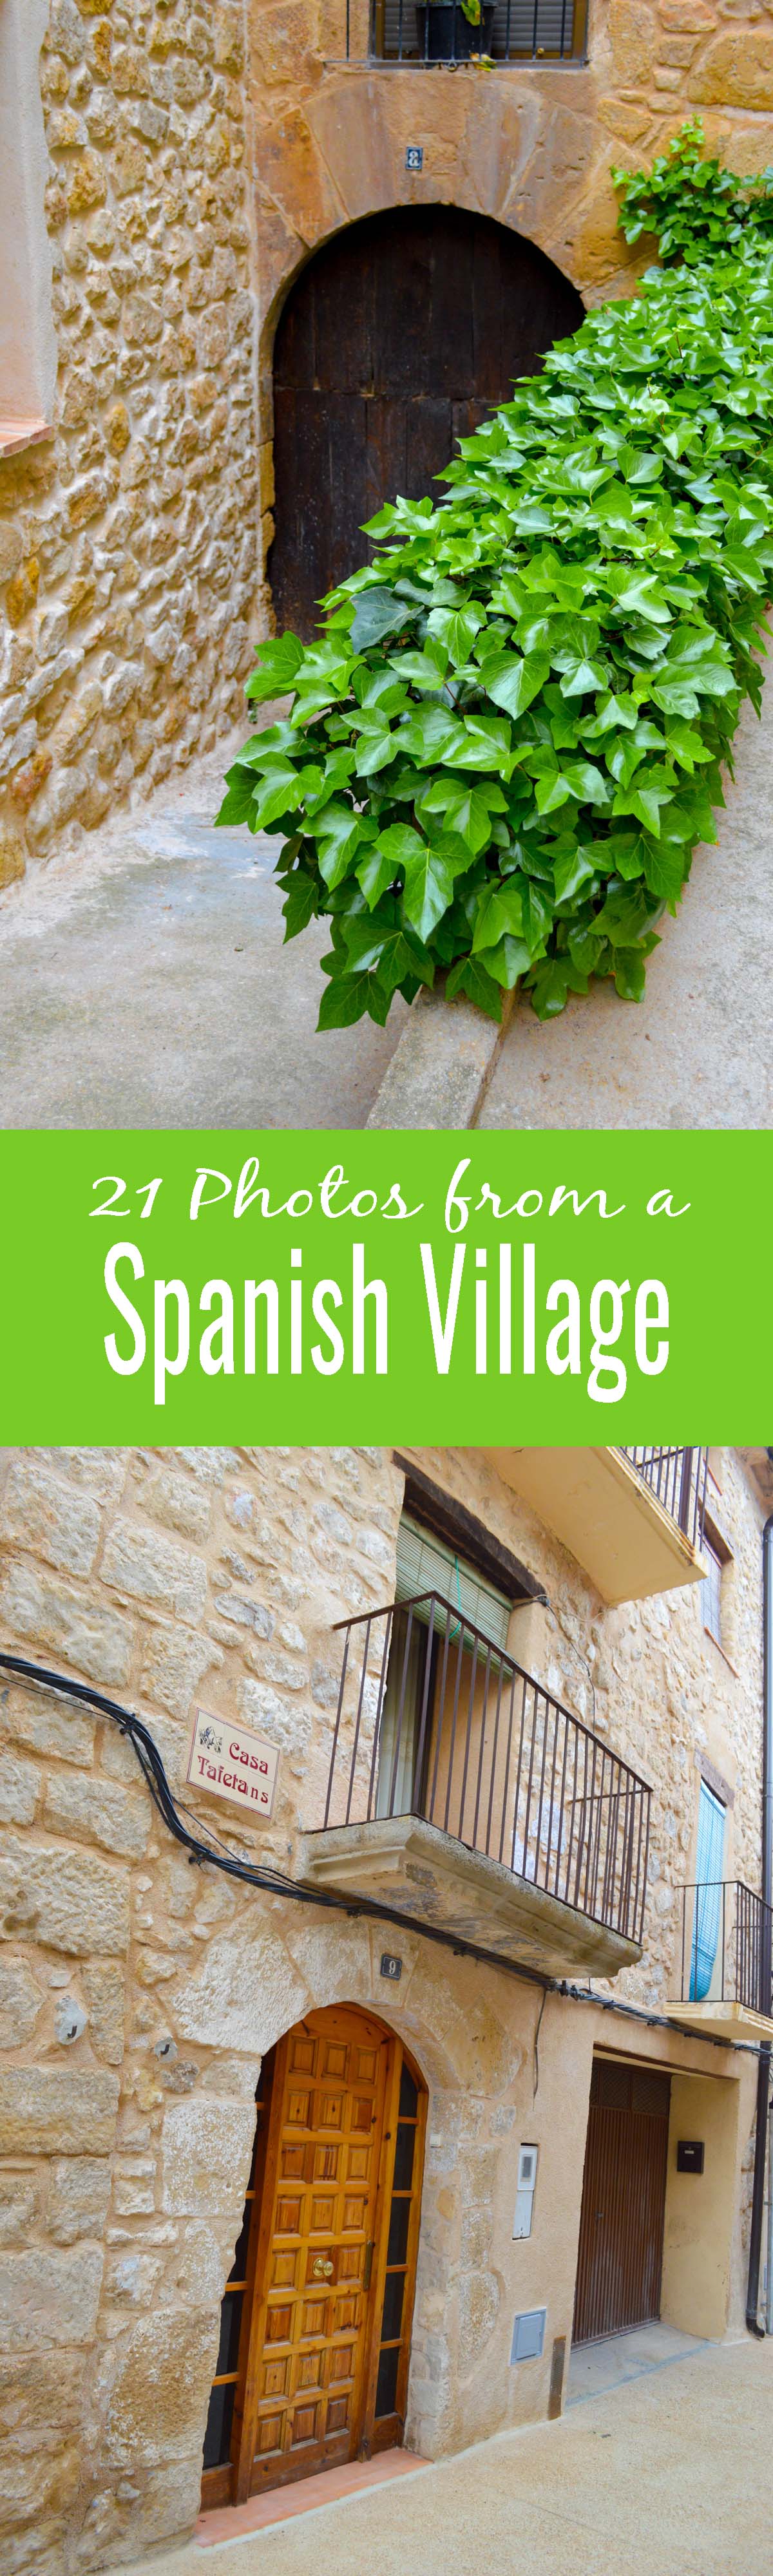 21 photos that will make you want to move to a Spanish village. You have to see these!